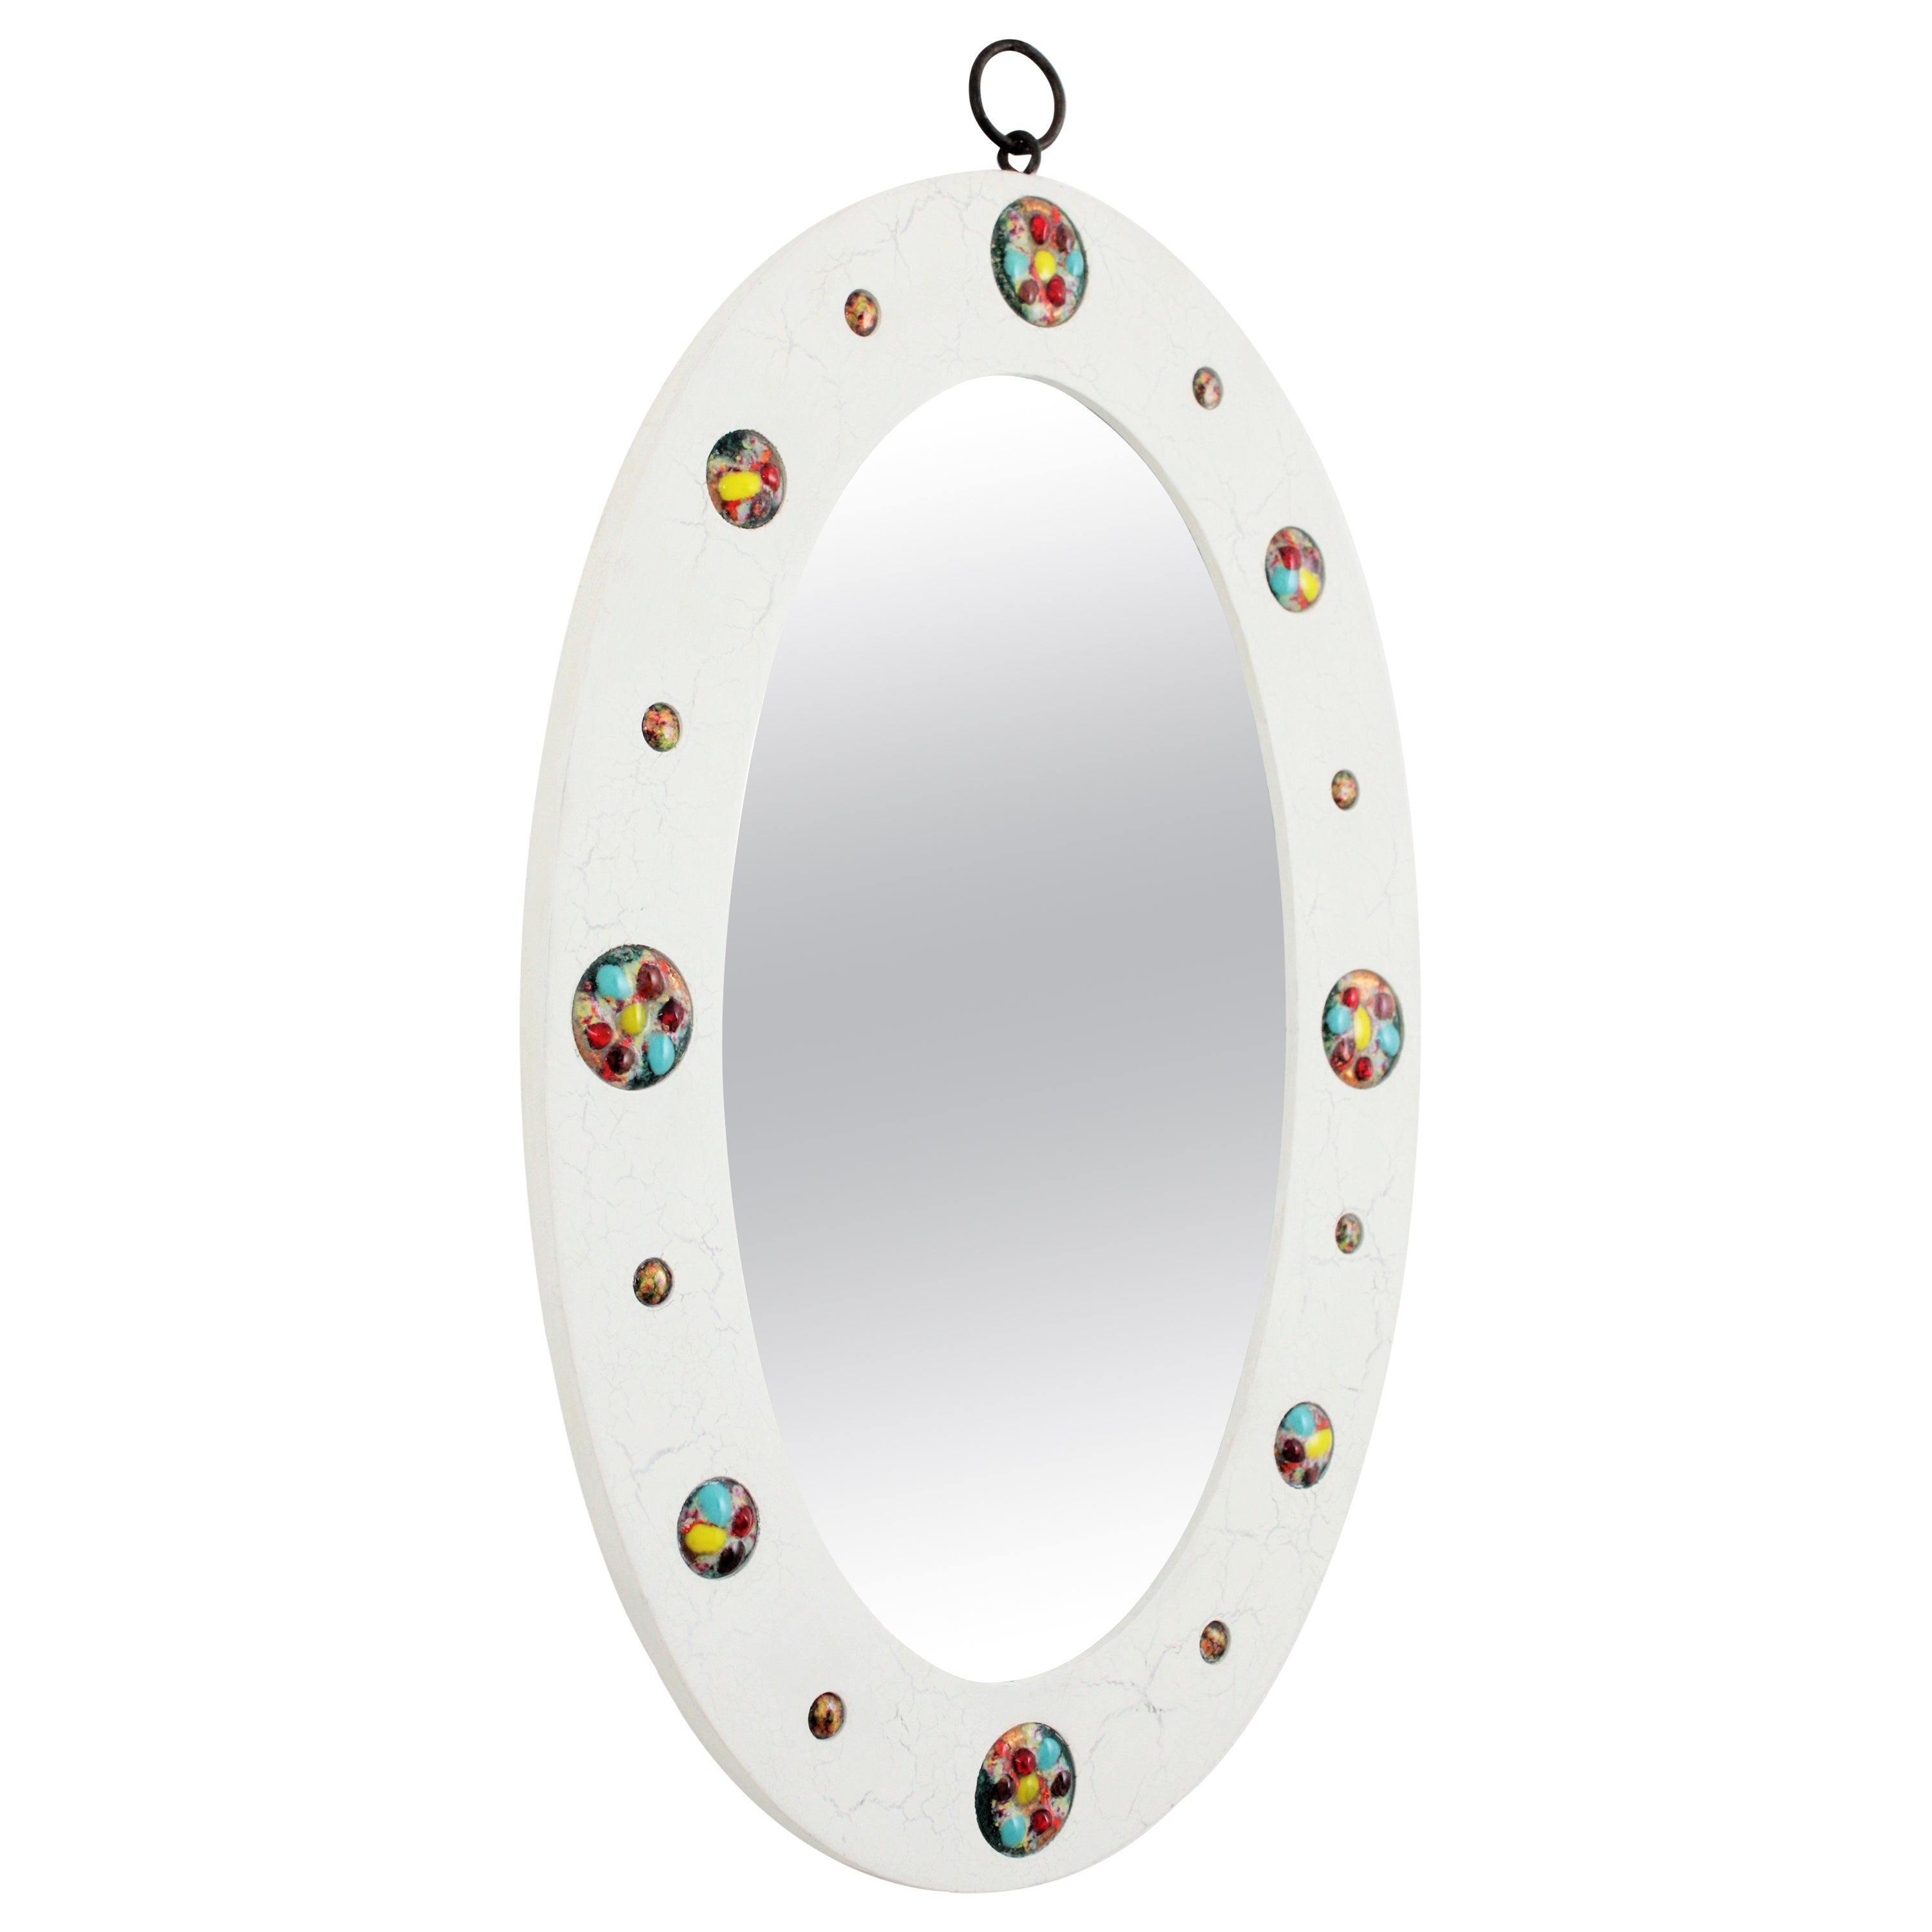 Mid-Century Modern wood and enamel oval mirror with white cracked patina. Spain, 1960s.
A beautiful oval shaped white patinated mirror with cracked effect and colorful enamel-on-copper circular pieces decorating the frame and an iron ring to hang